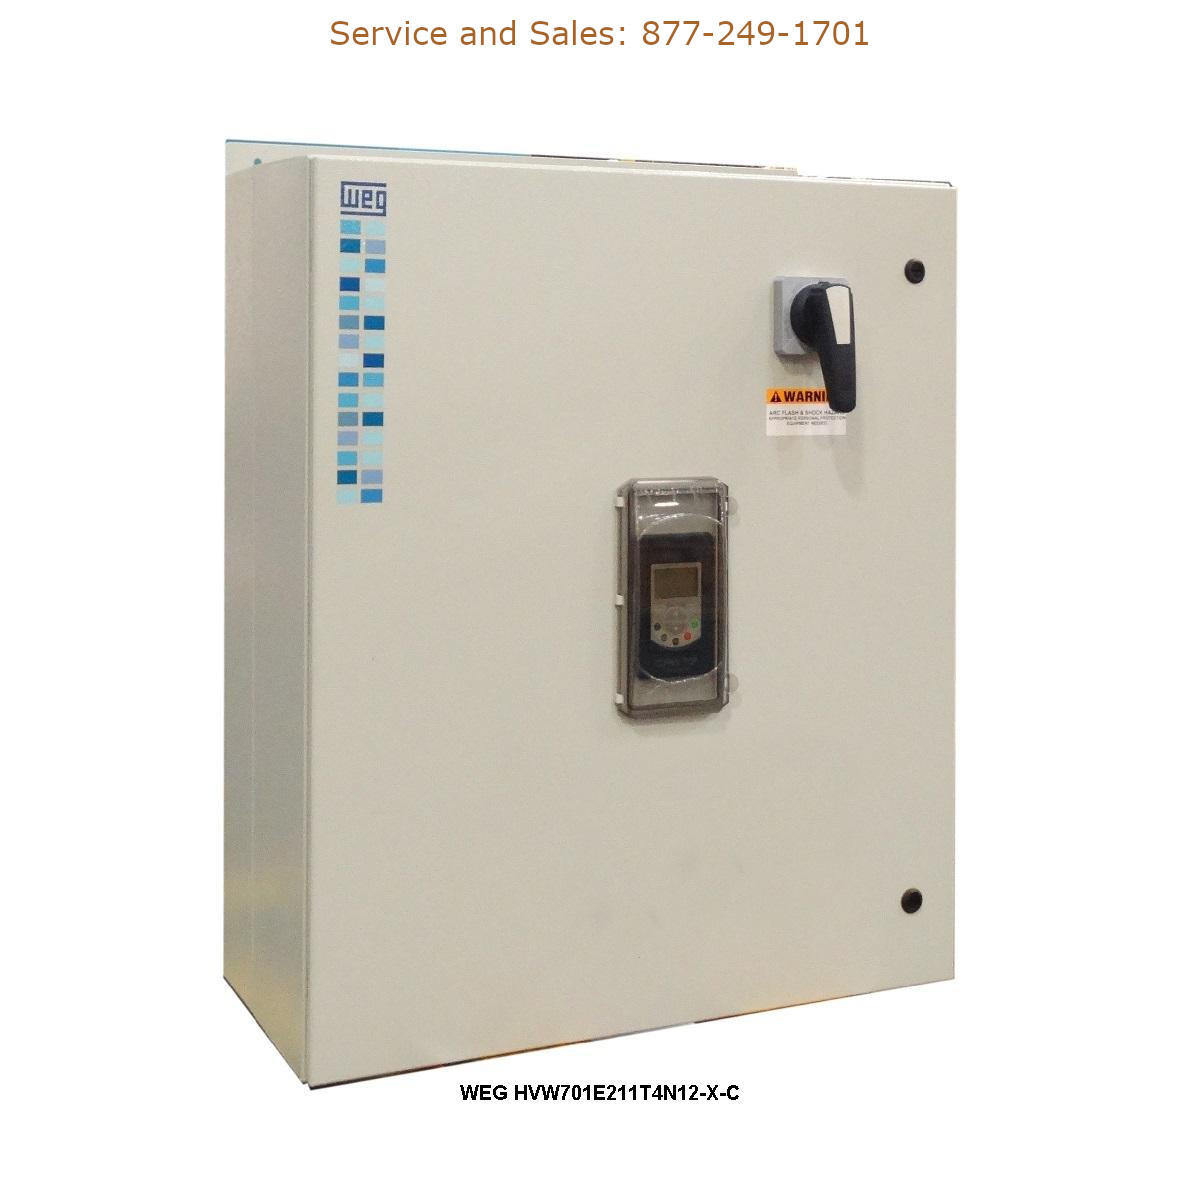 WEG HVW701E211T4N12-X-C WEG Model Number HVW701E211T4N12-X-C WEG Drives, Variable Speed Drives Repair Service, Troubleshooting, Replacement Parts https://gesrepair.com/wp-content/uploads/2022/WEG/WEG_HVW701E211T4N12-X-C_Drives_Variable_Speed_Drives.jpg